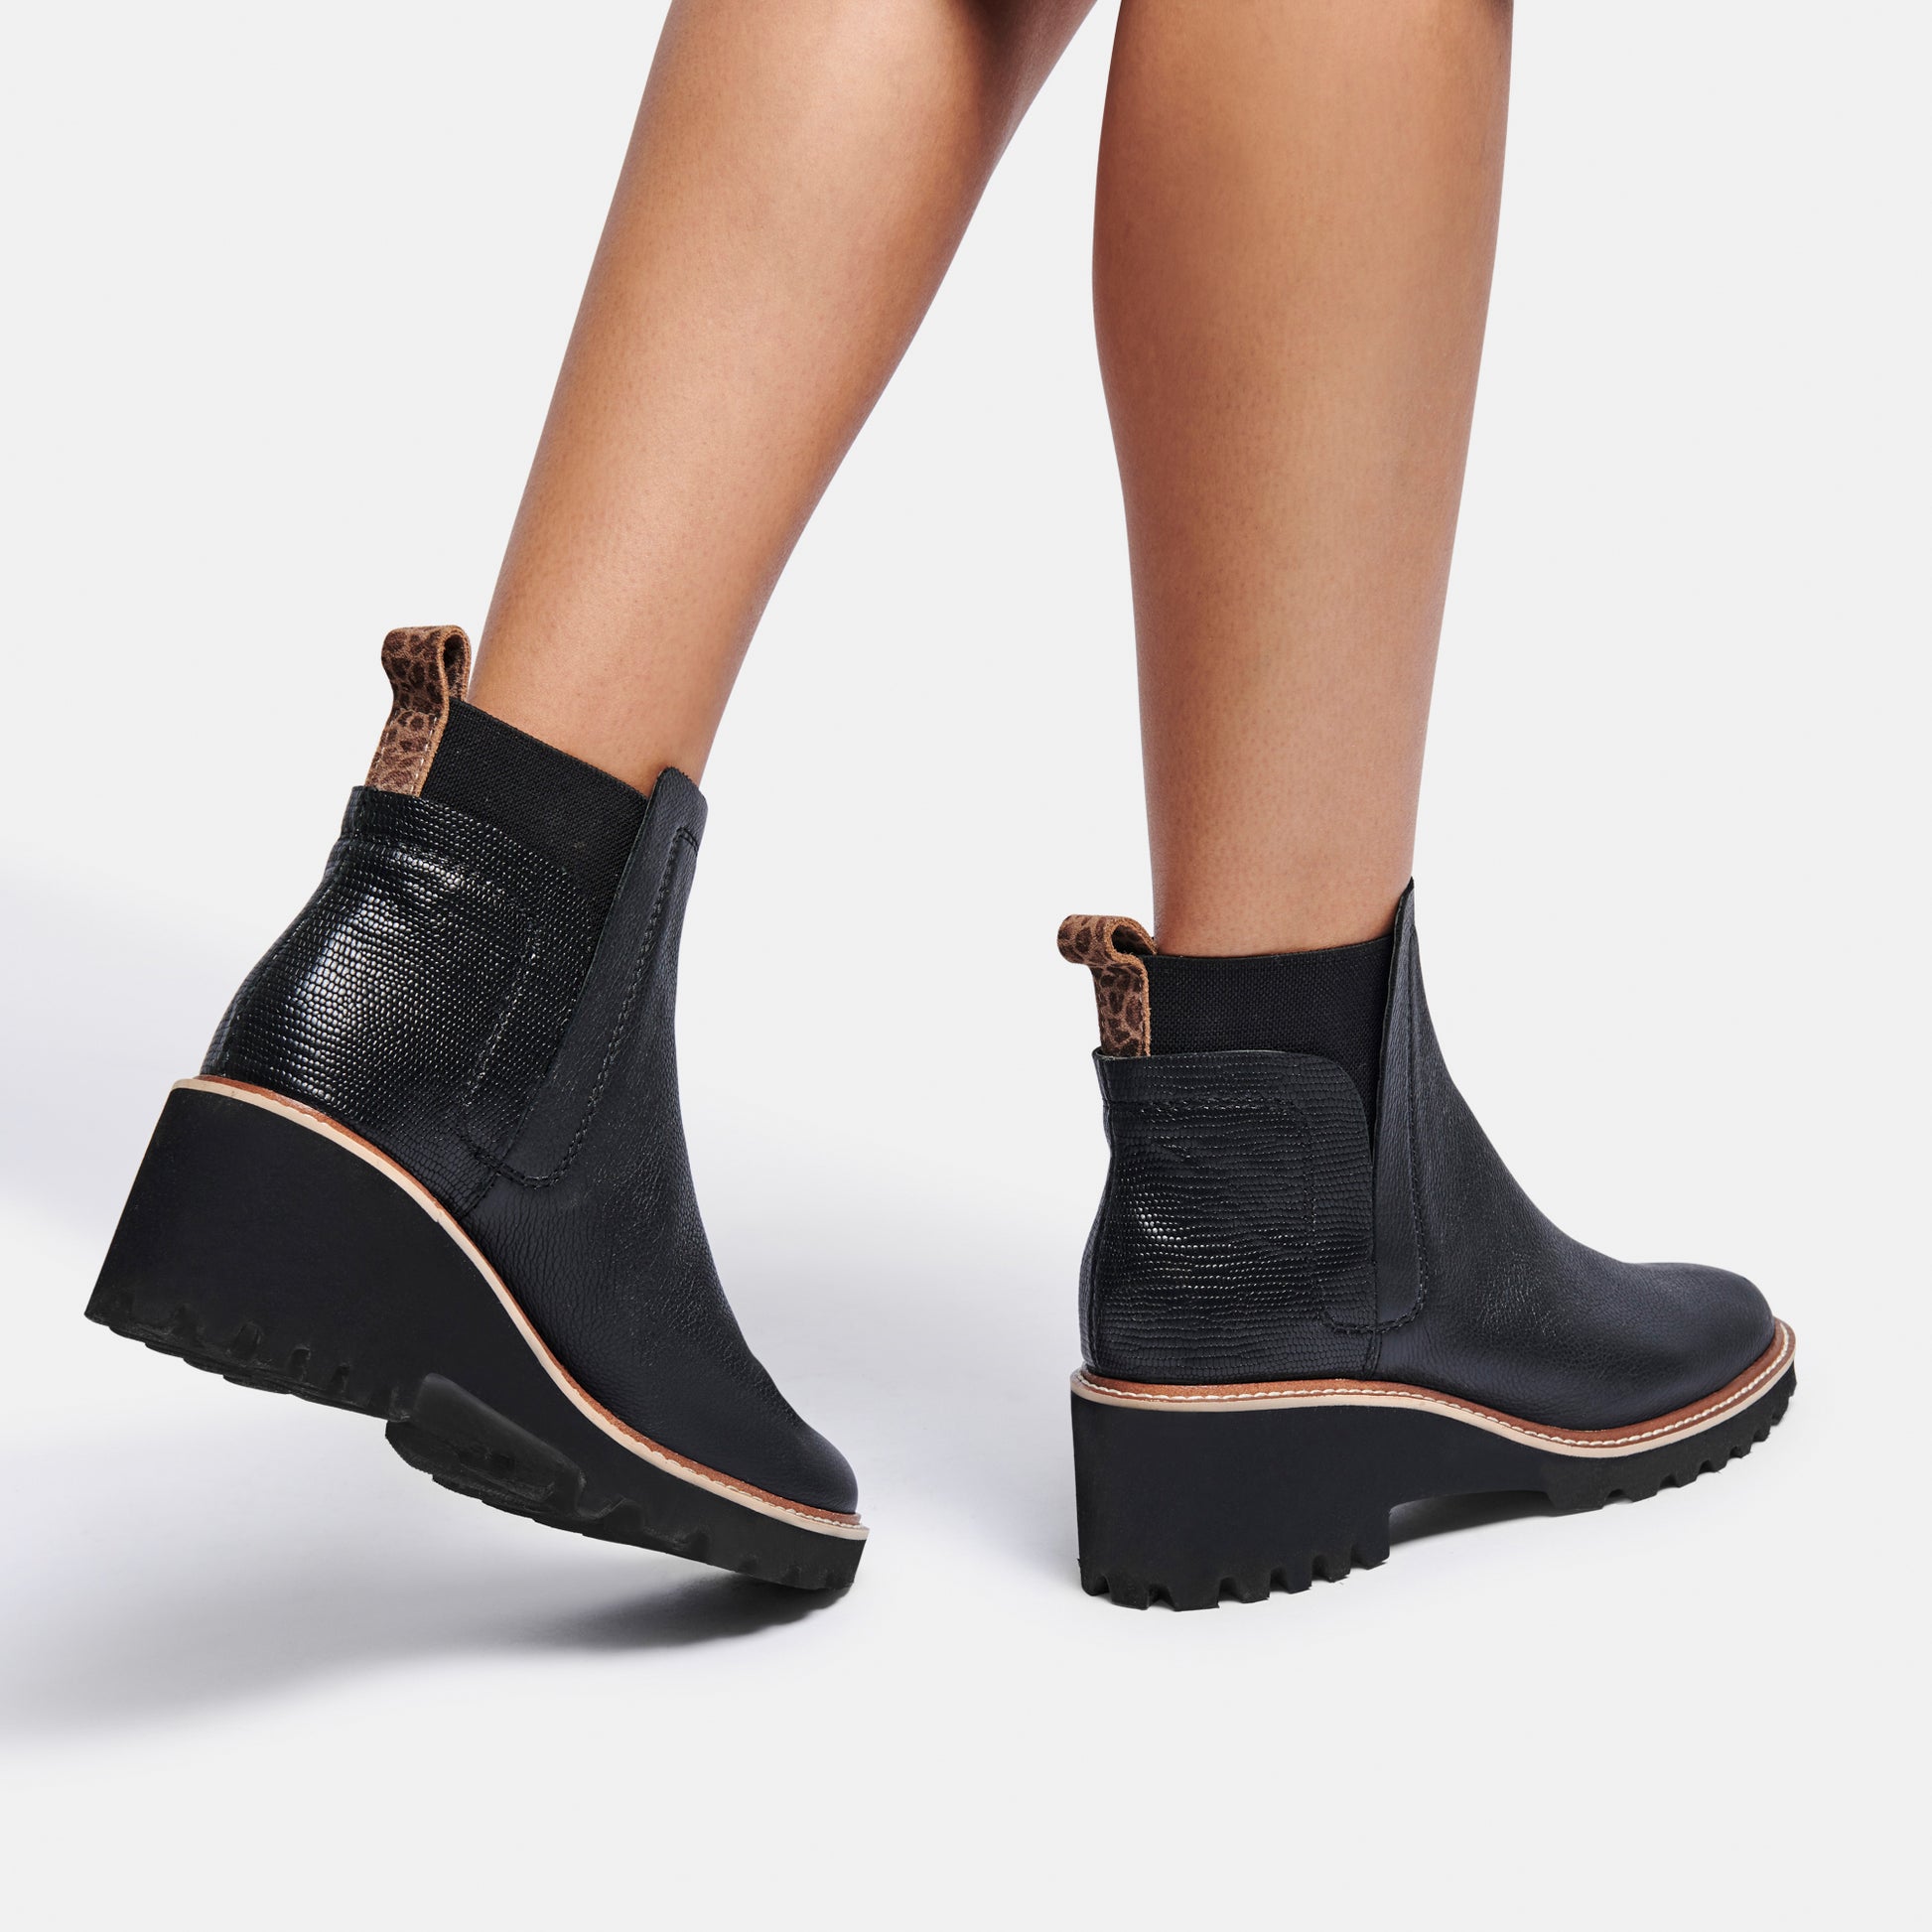 HUEY H2O BOOTS IN BLACK LEATHER -   Dolce Vita